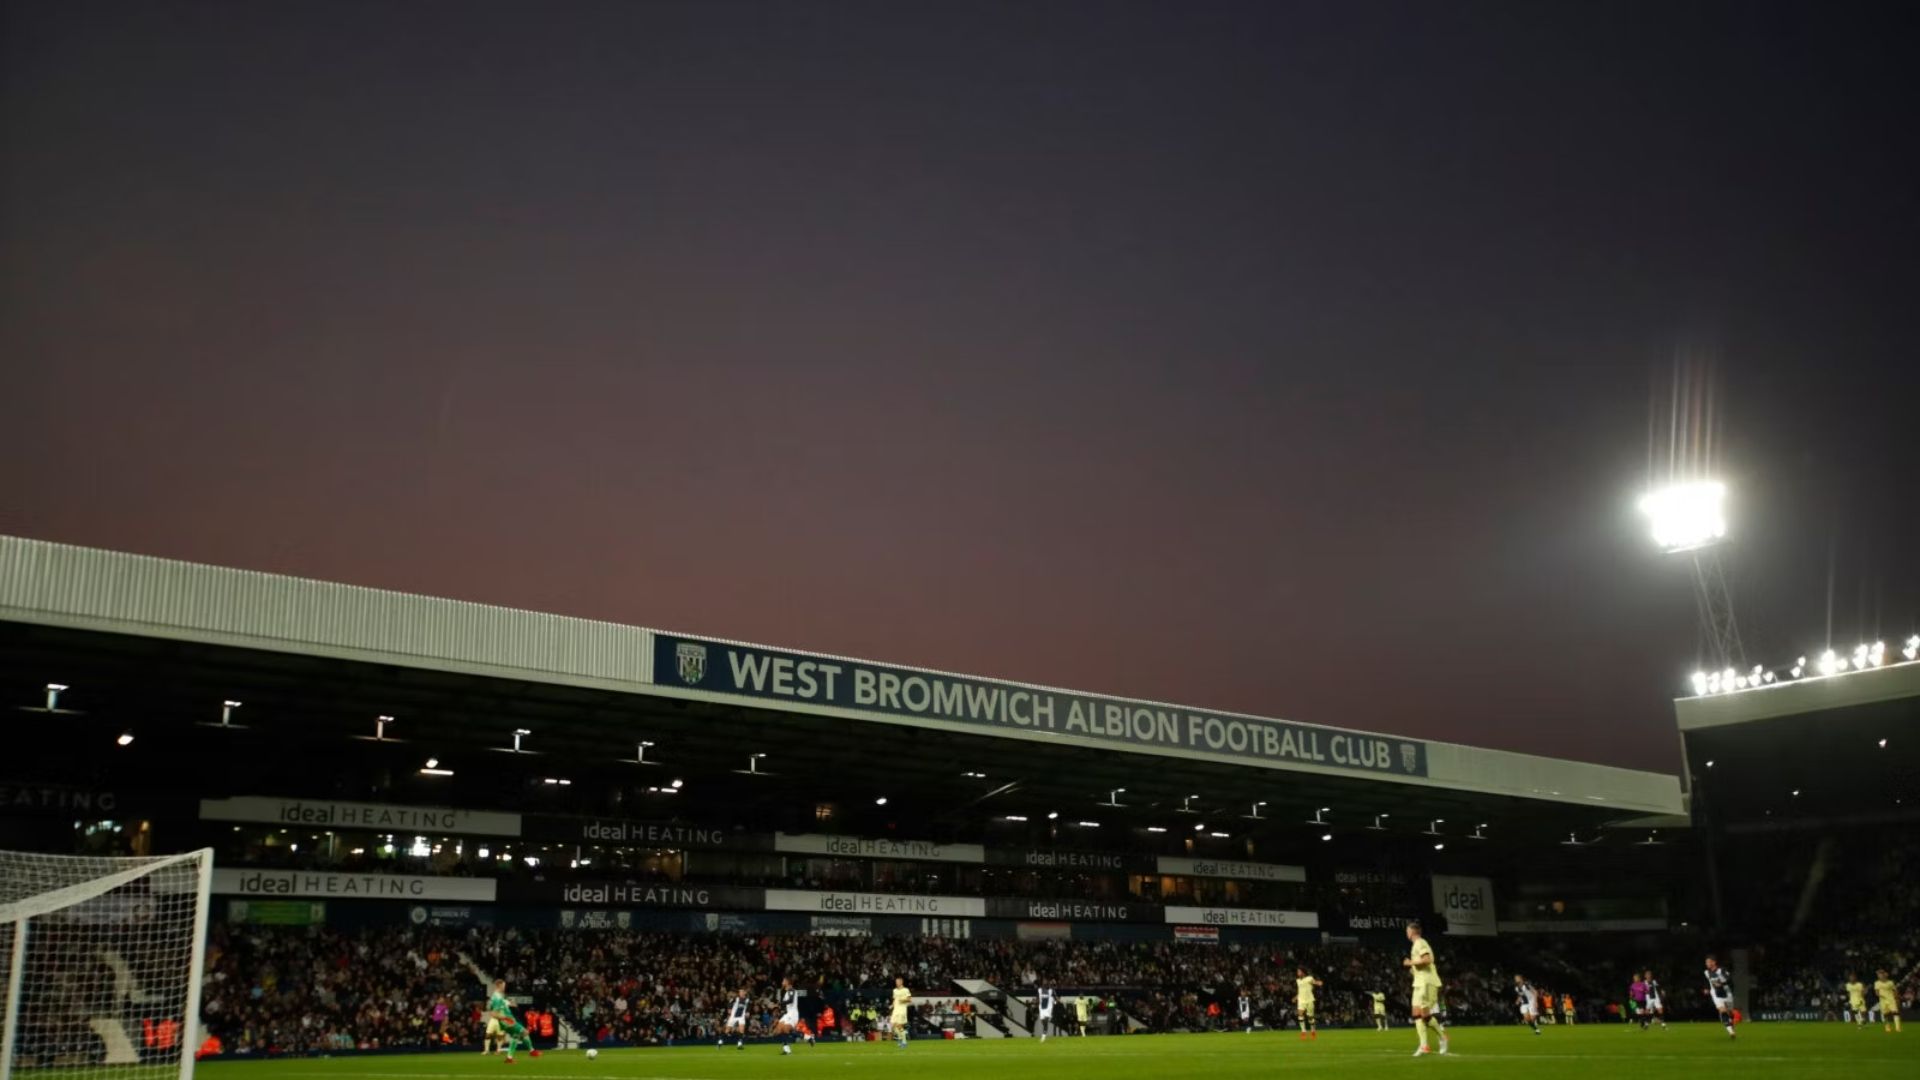 West Brom The Hawthorns general